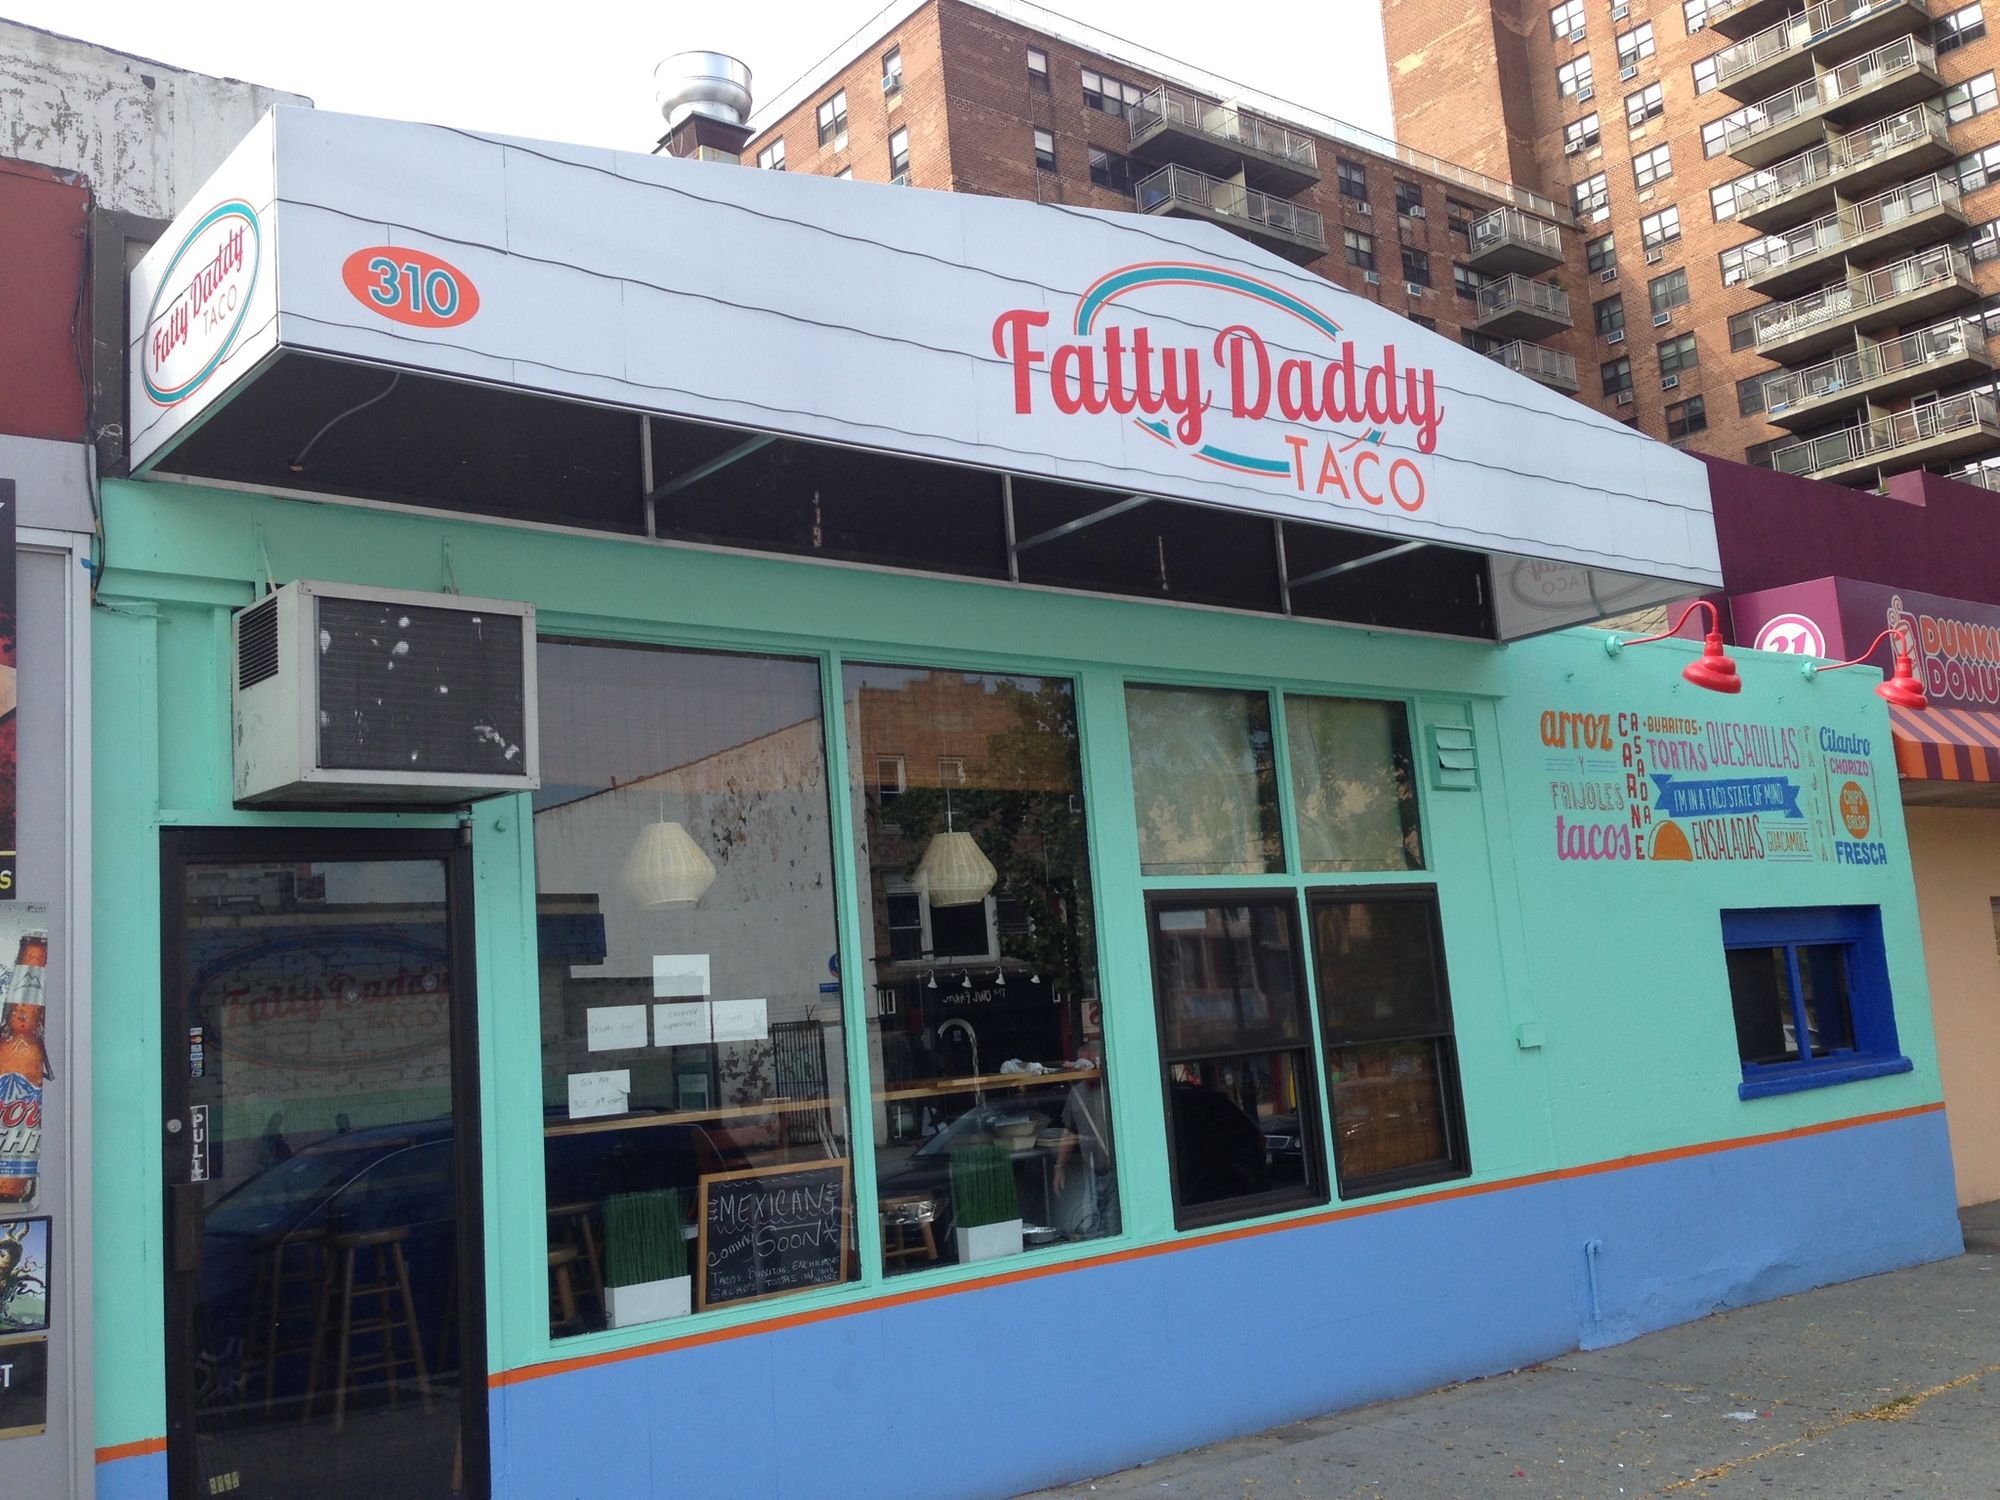 Signage For Fatty Daddy Taco Appears On 9th Street